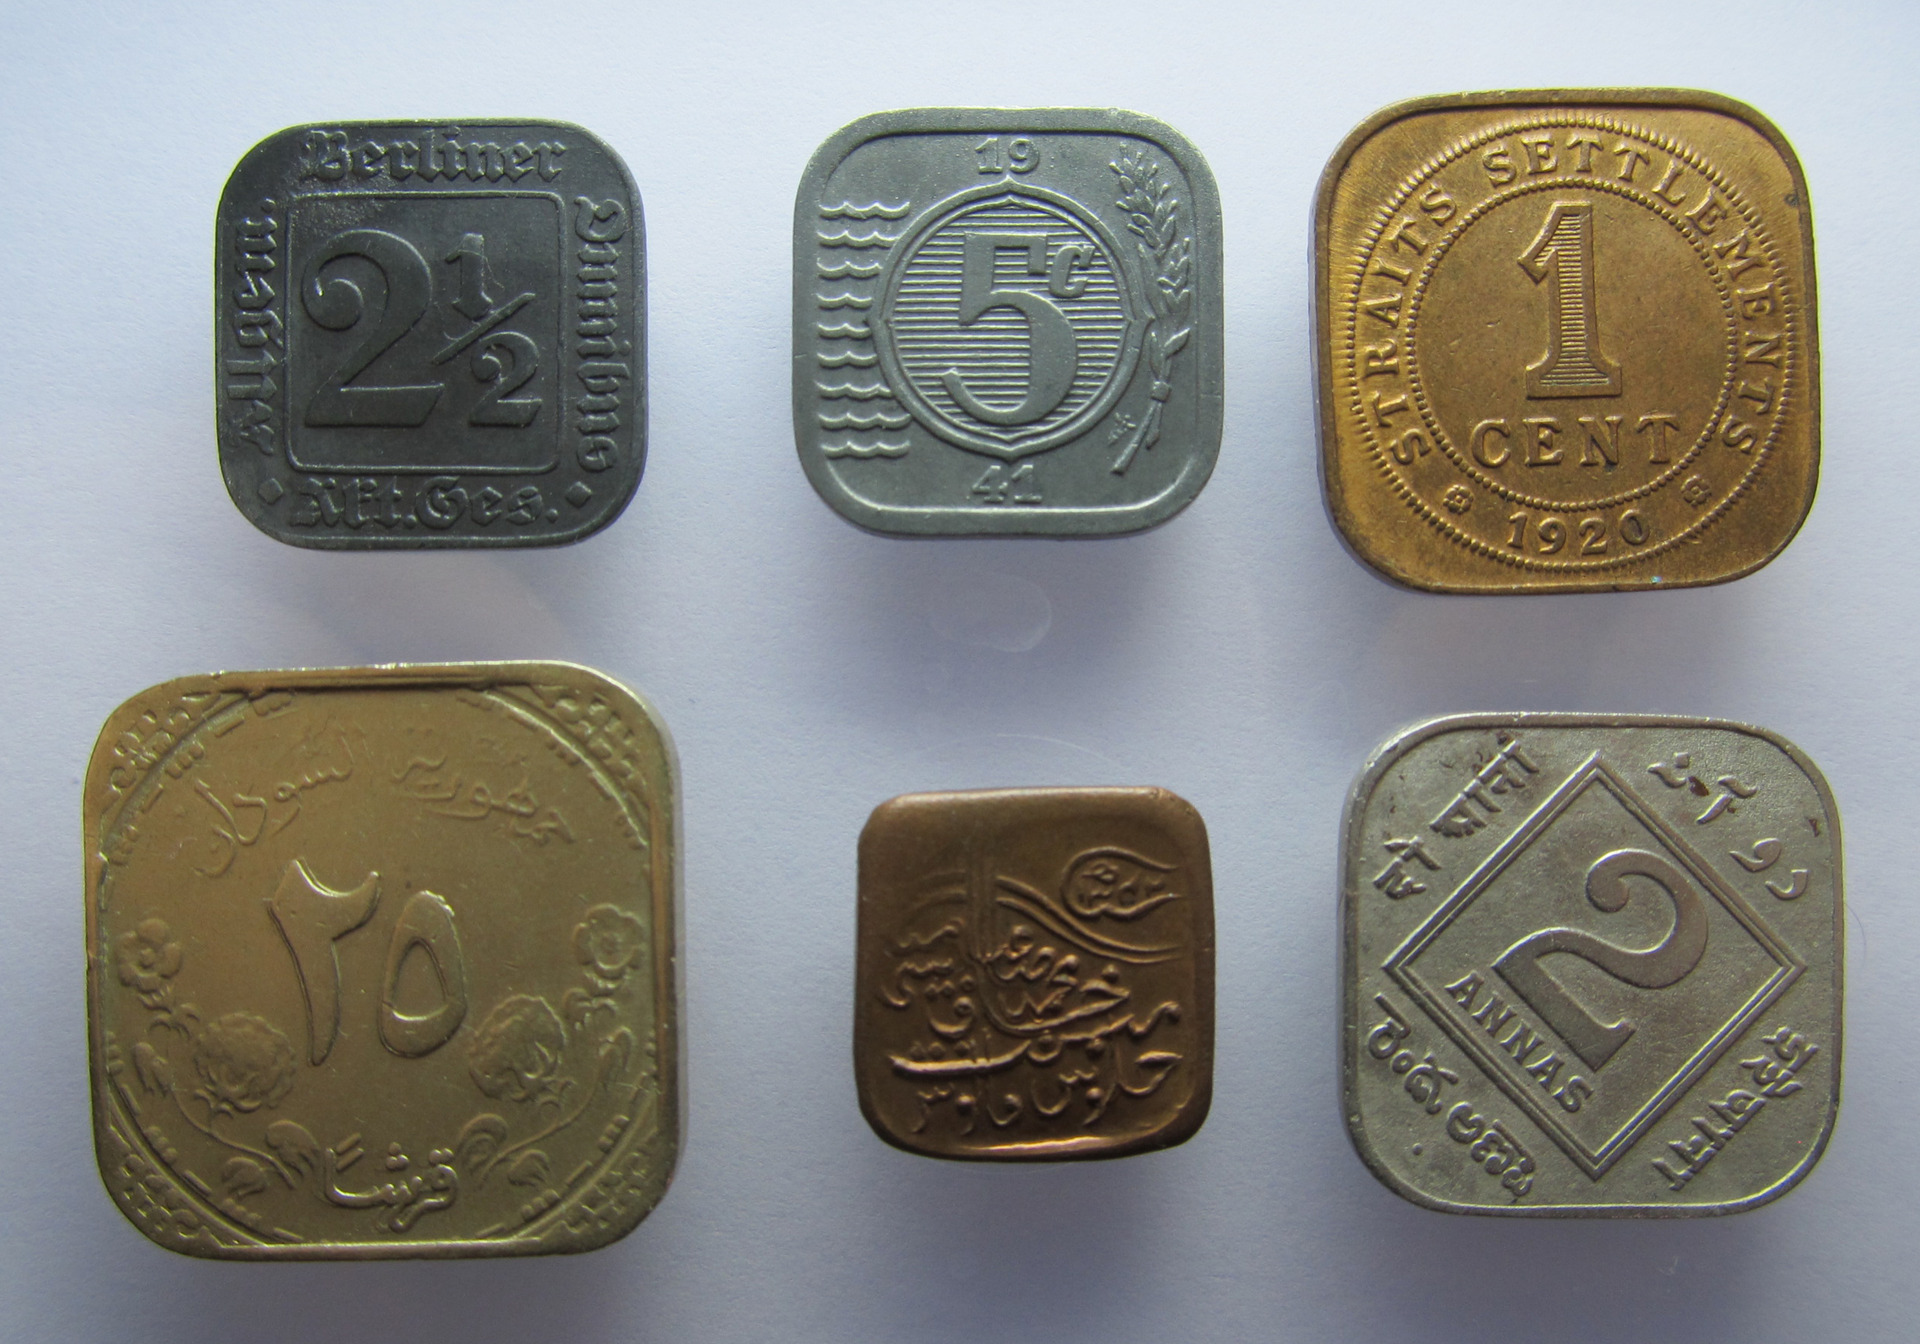 6 Square Coins From My Collection | Coin Talk